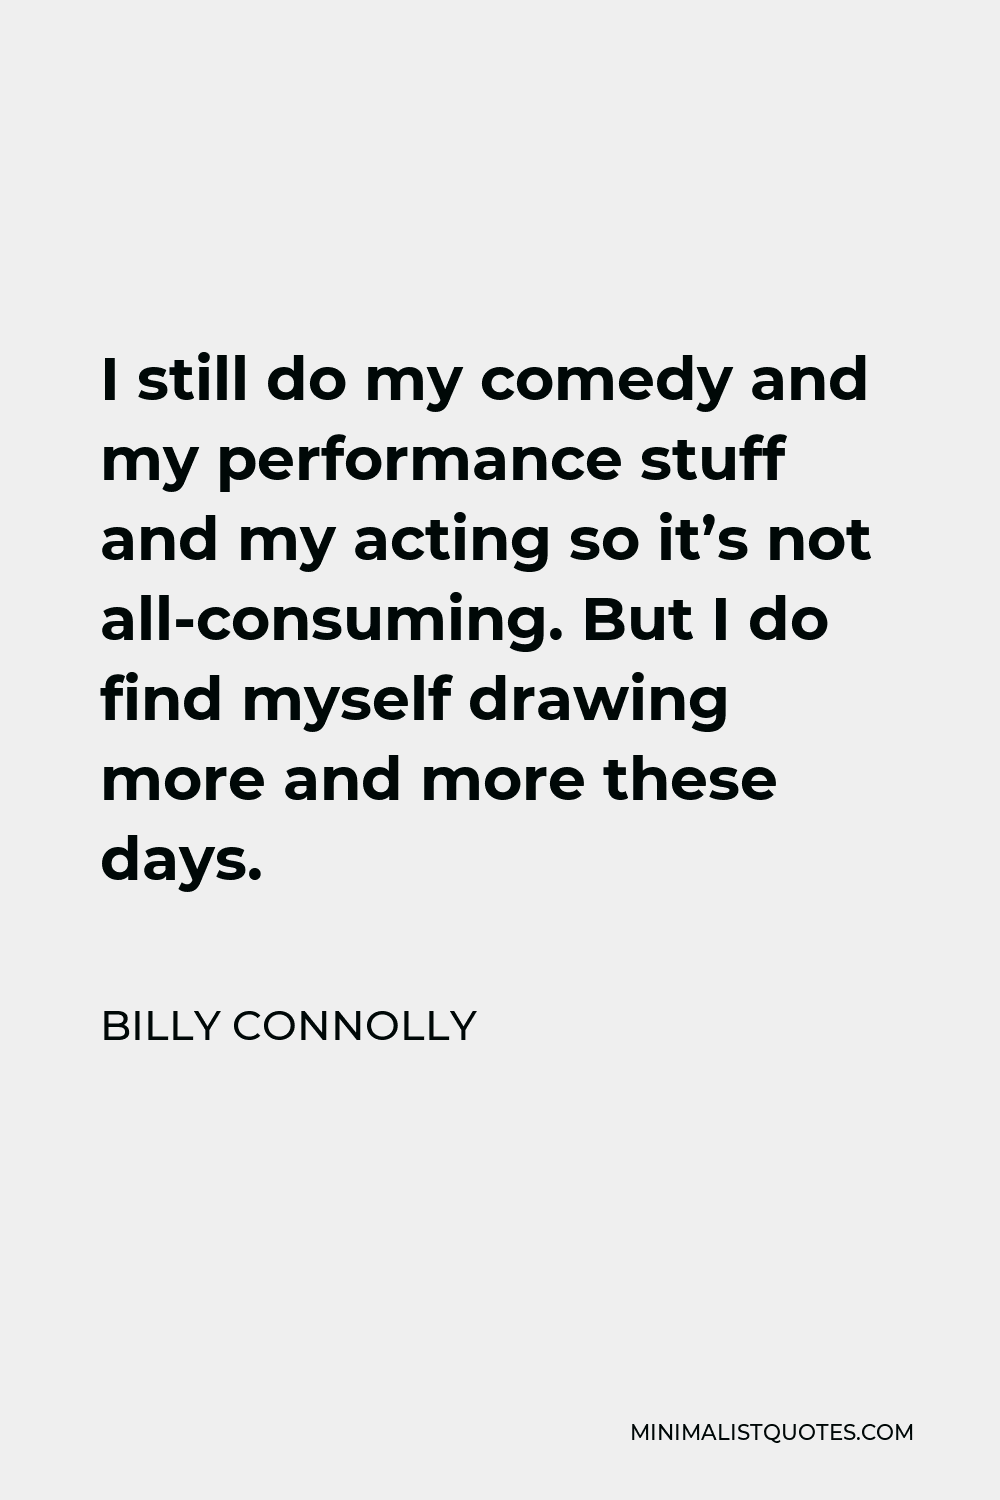 Billy Connolly Quote - I still do my comedy and my performance stuff and my acting so it’s not all-consuming. But I do find myself drawing more and more these days.